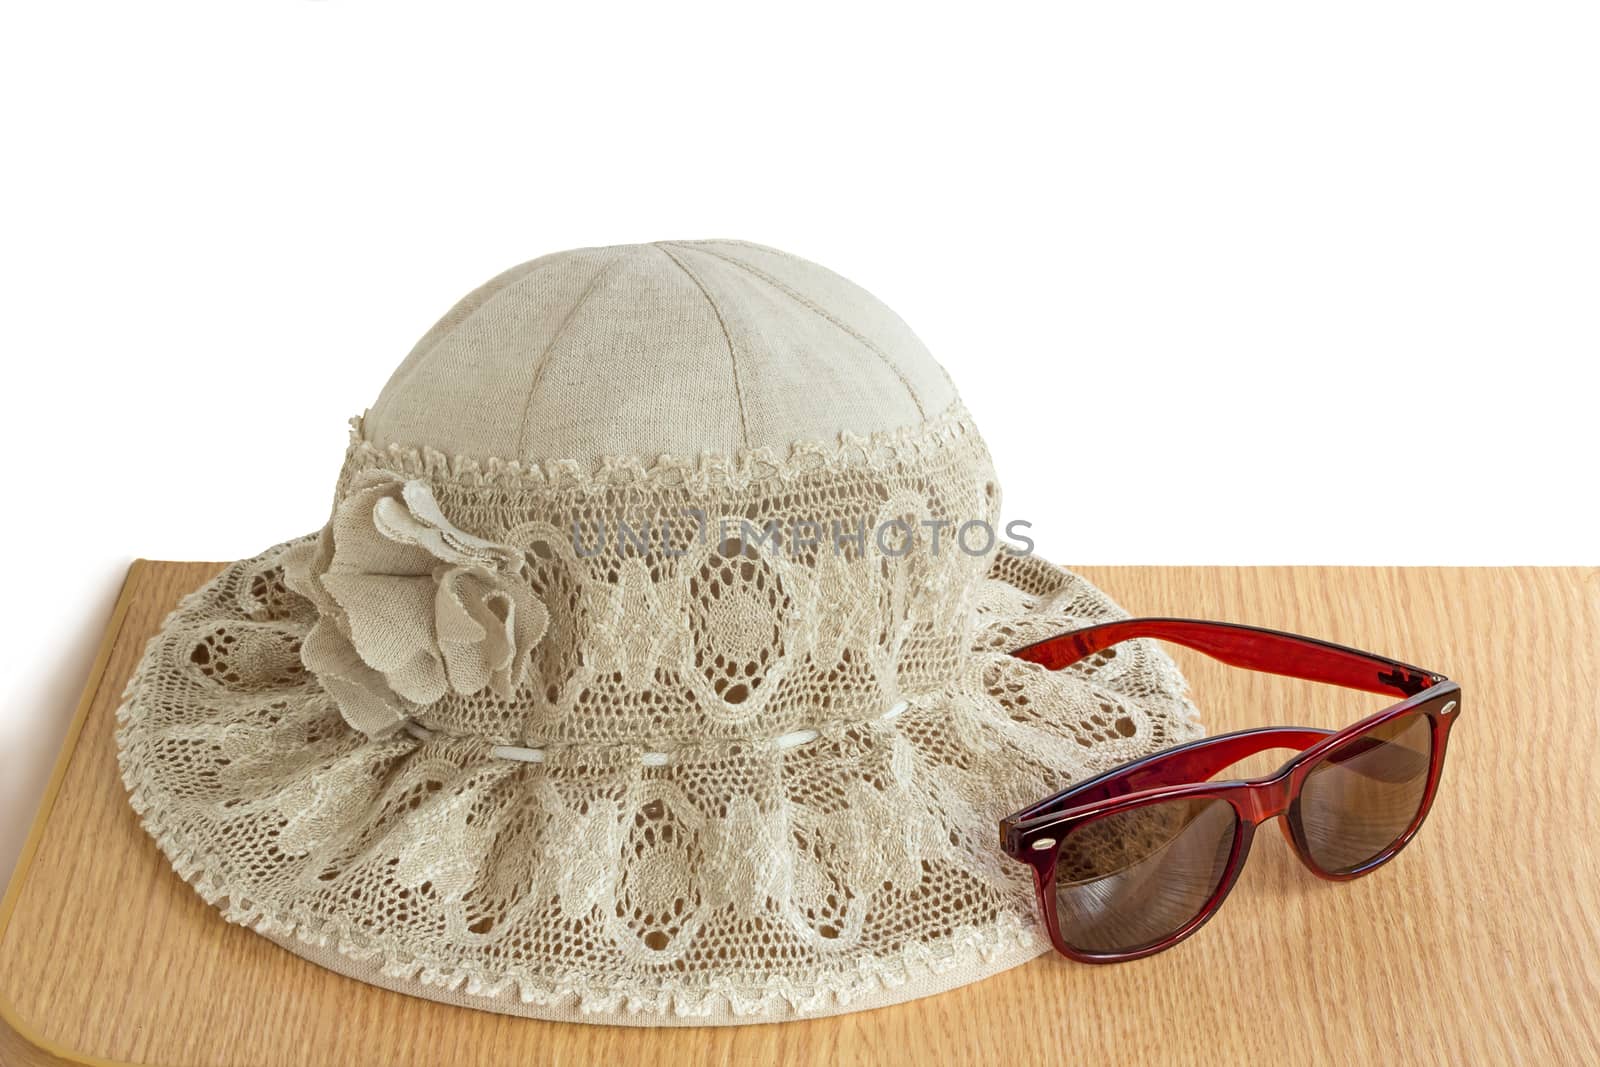 Female hat from a linen cloth and lacy fabric for protection against the sun. It is presented on a white background.